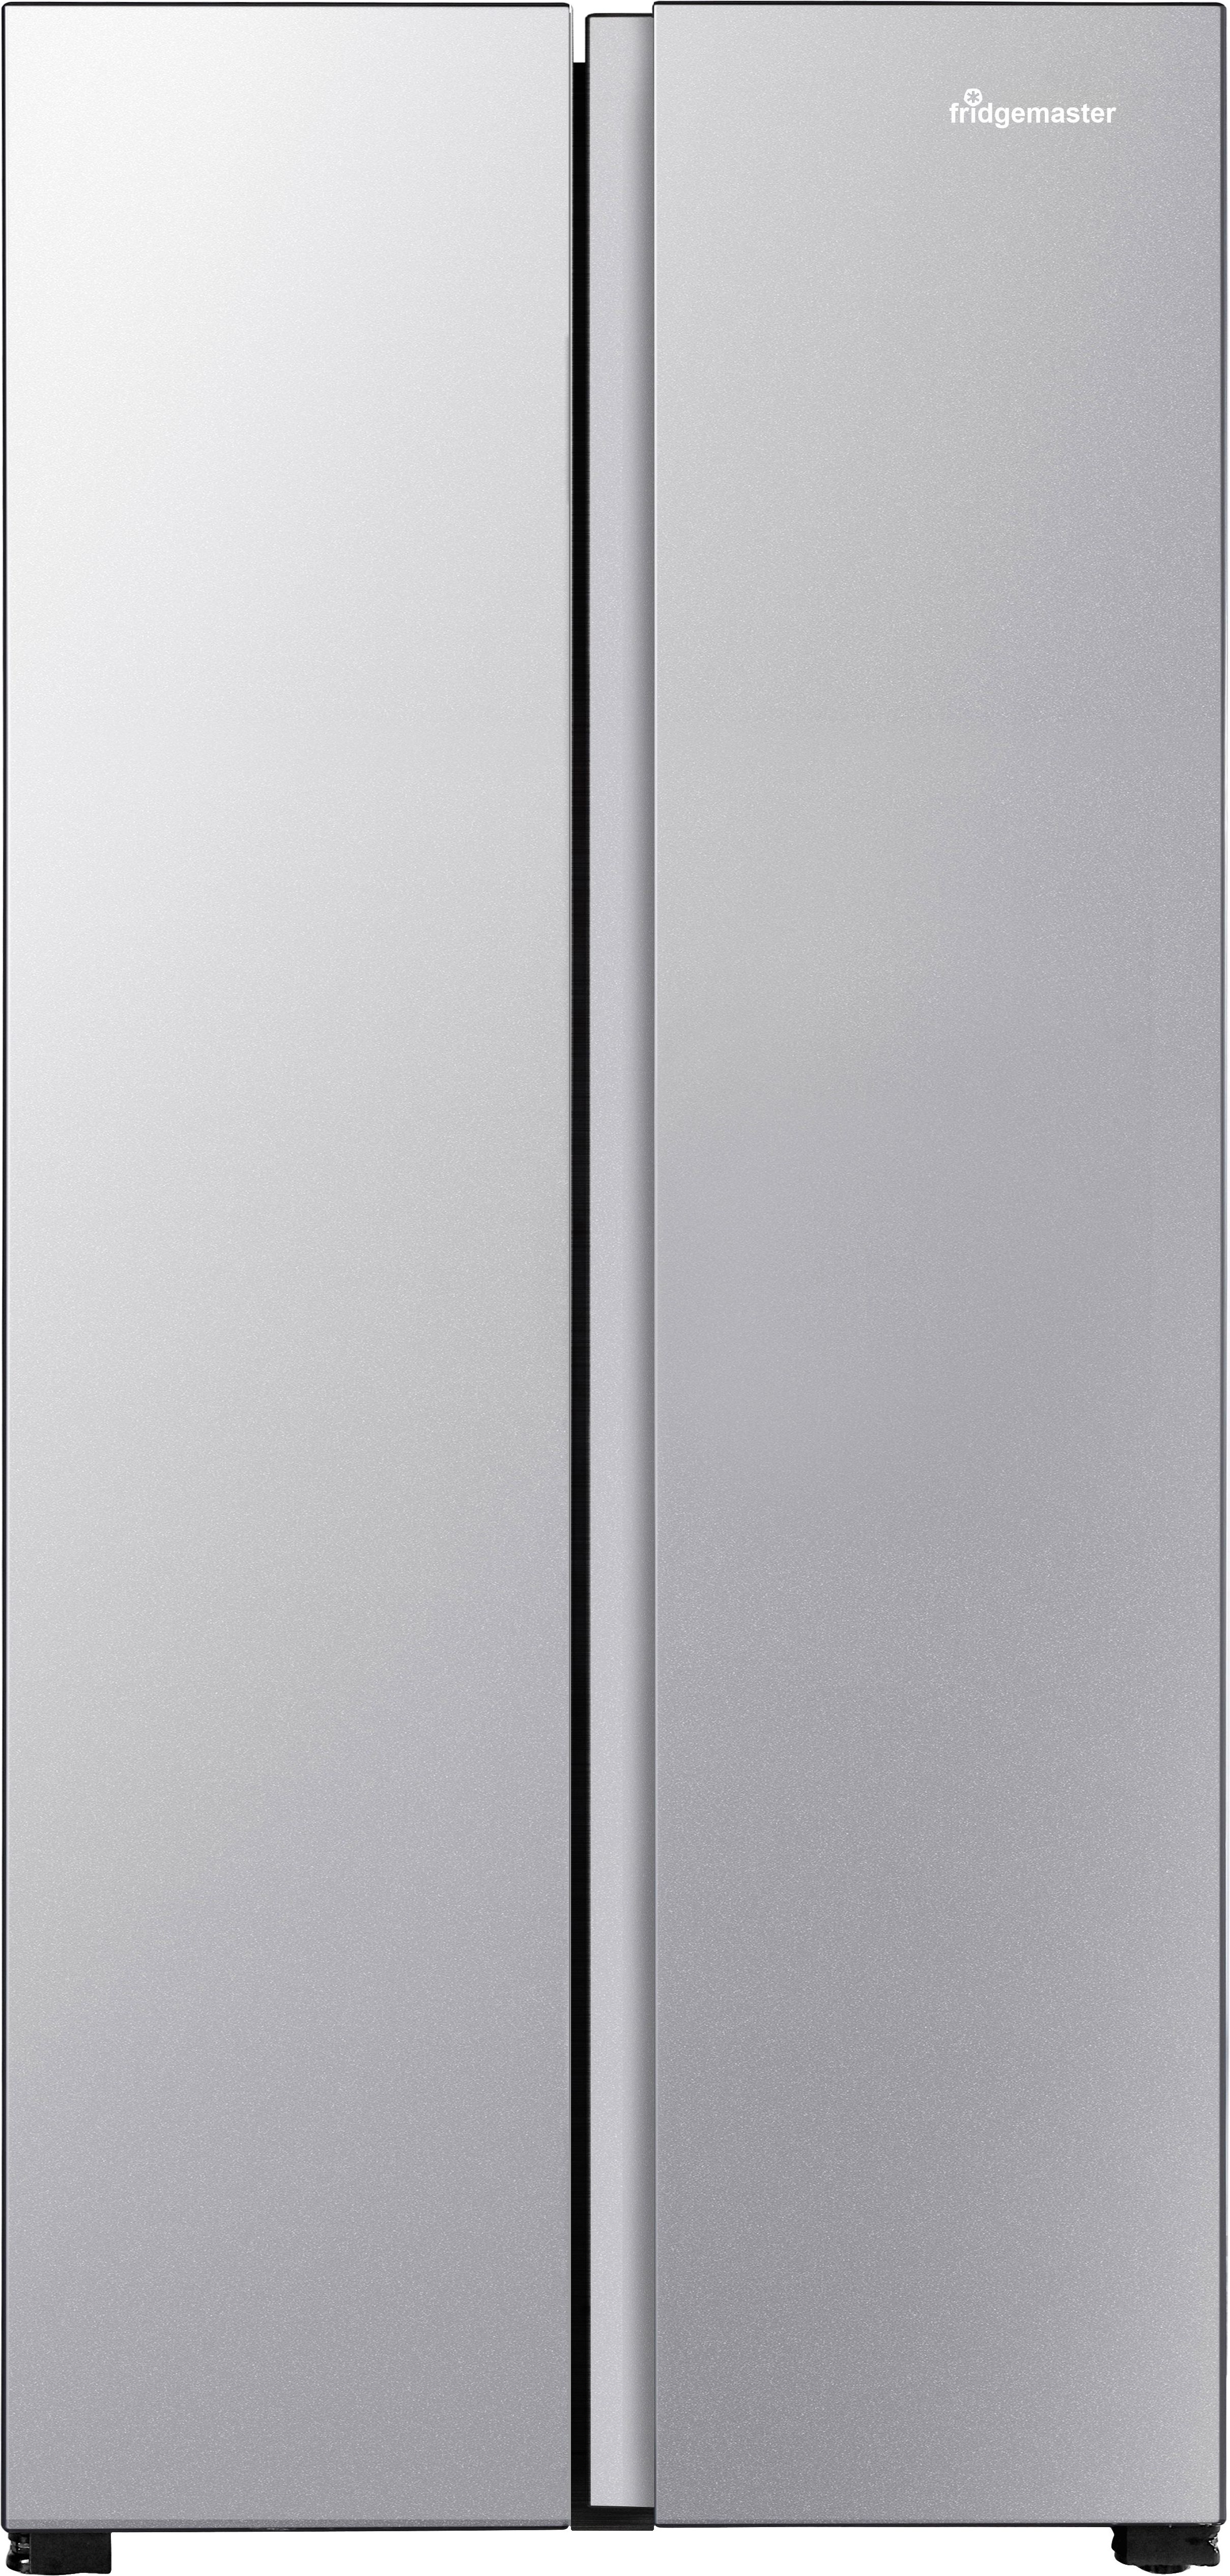 Fridgemaster MS83430ES Total No Frost American Fridge Freezer - Silver - E Rated, Silver